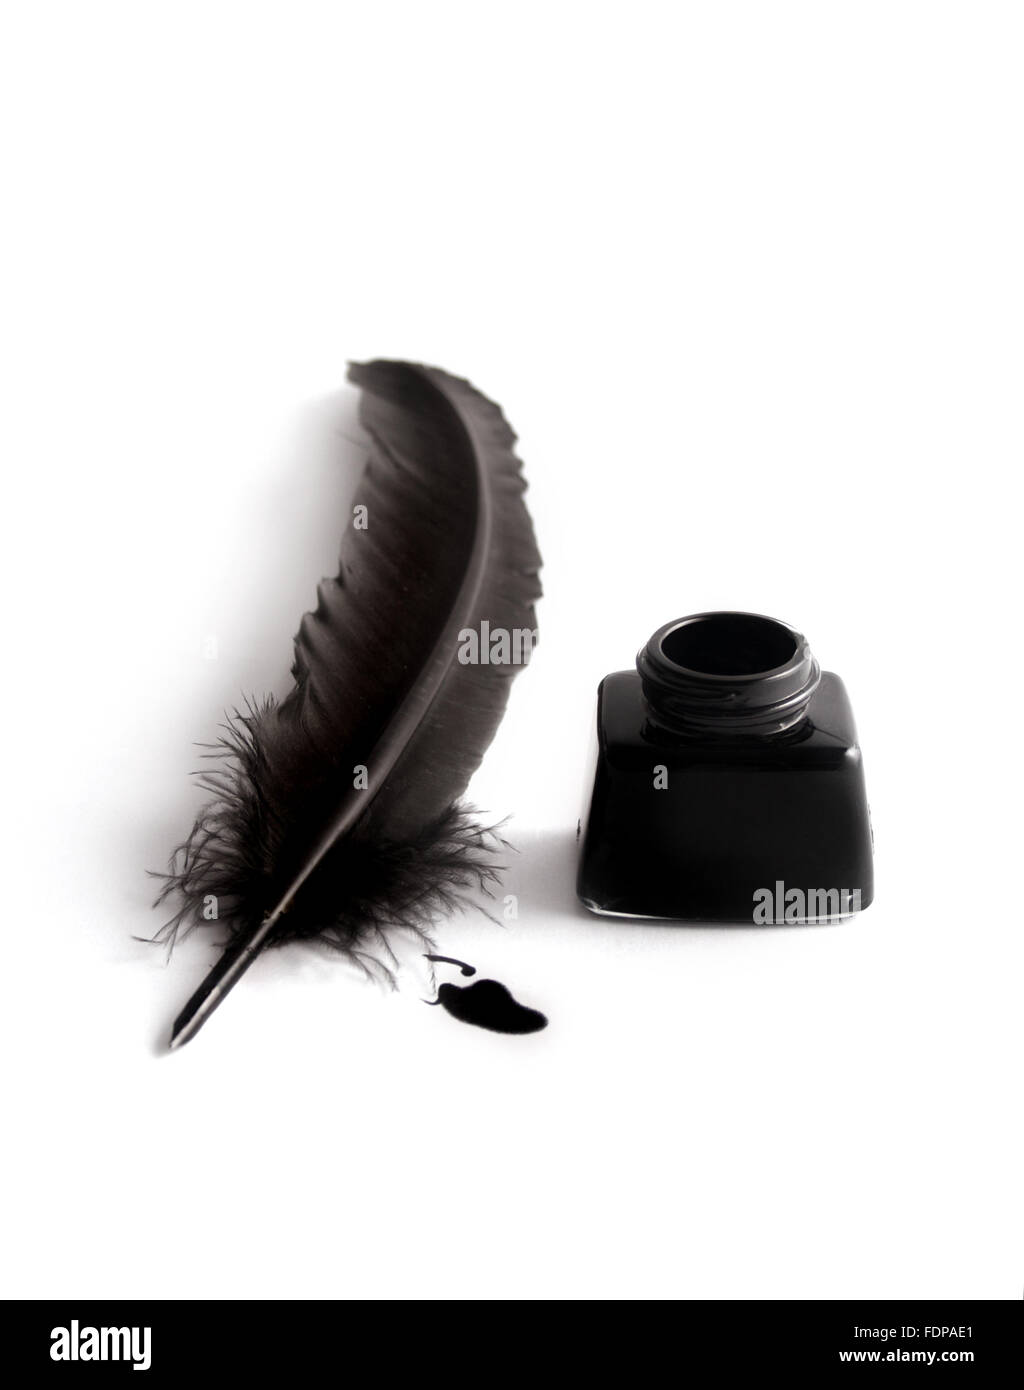 Inkwell And Quill Stock Photo, Picture and Royalty Free Image. Image  15022648.